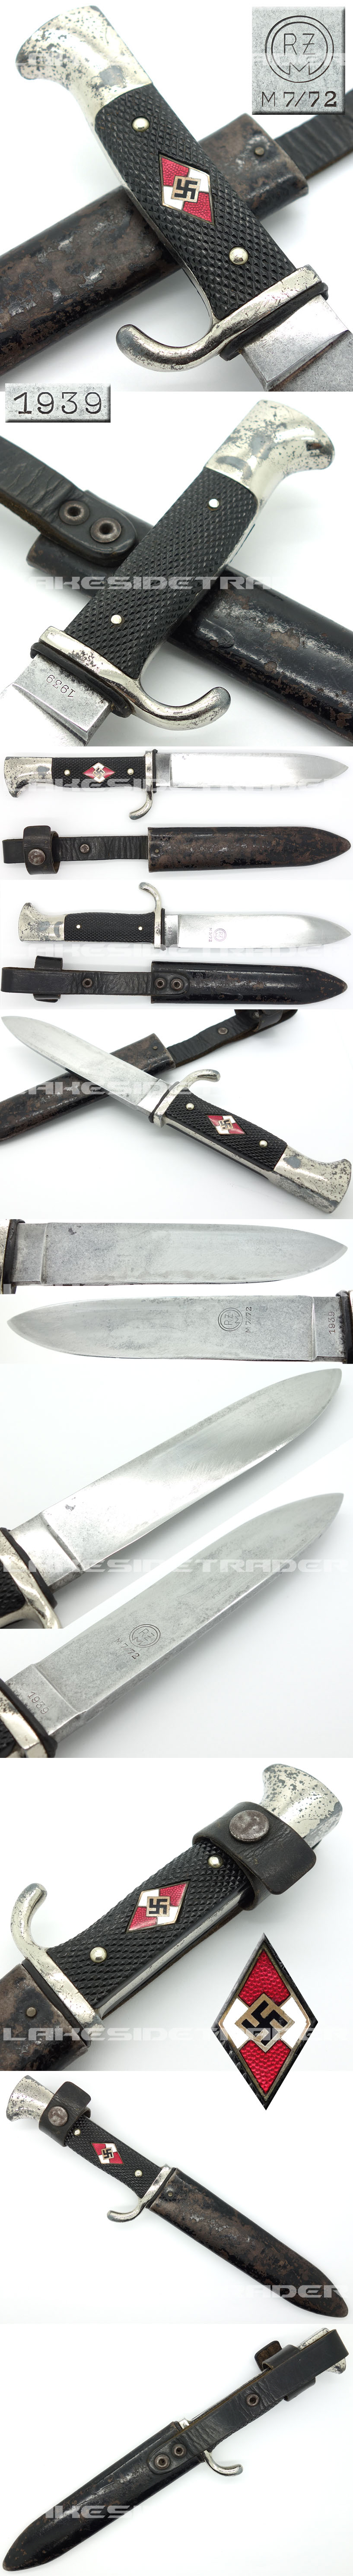 Hitler Youth Knife by RZM M7/72 1939